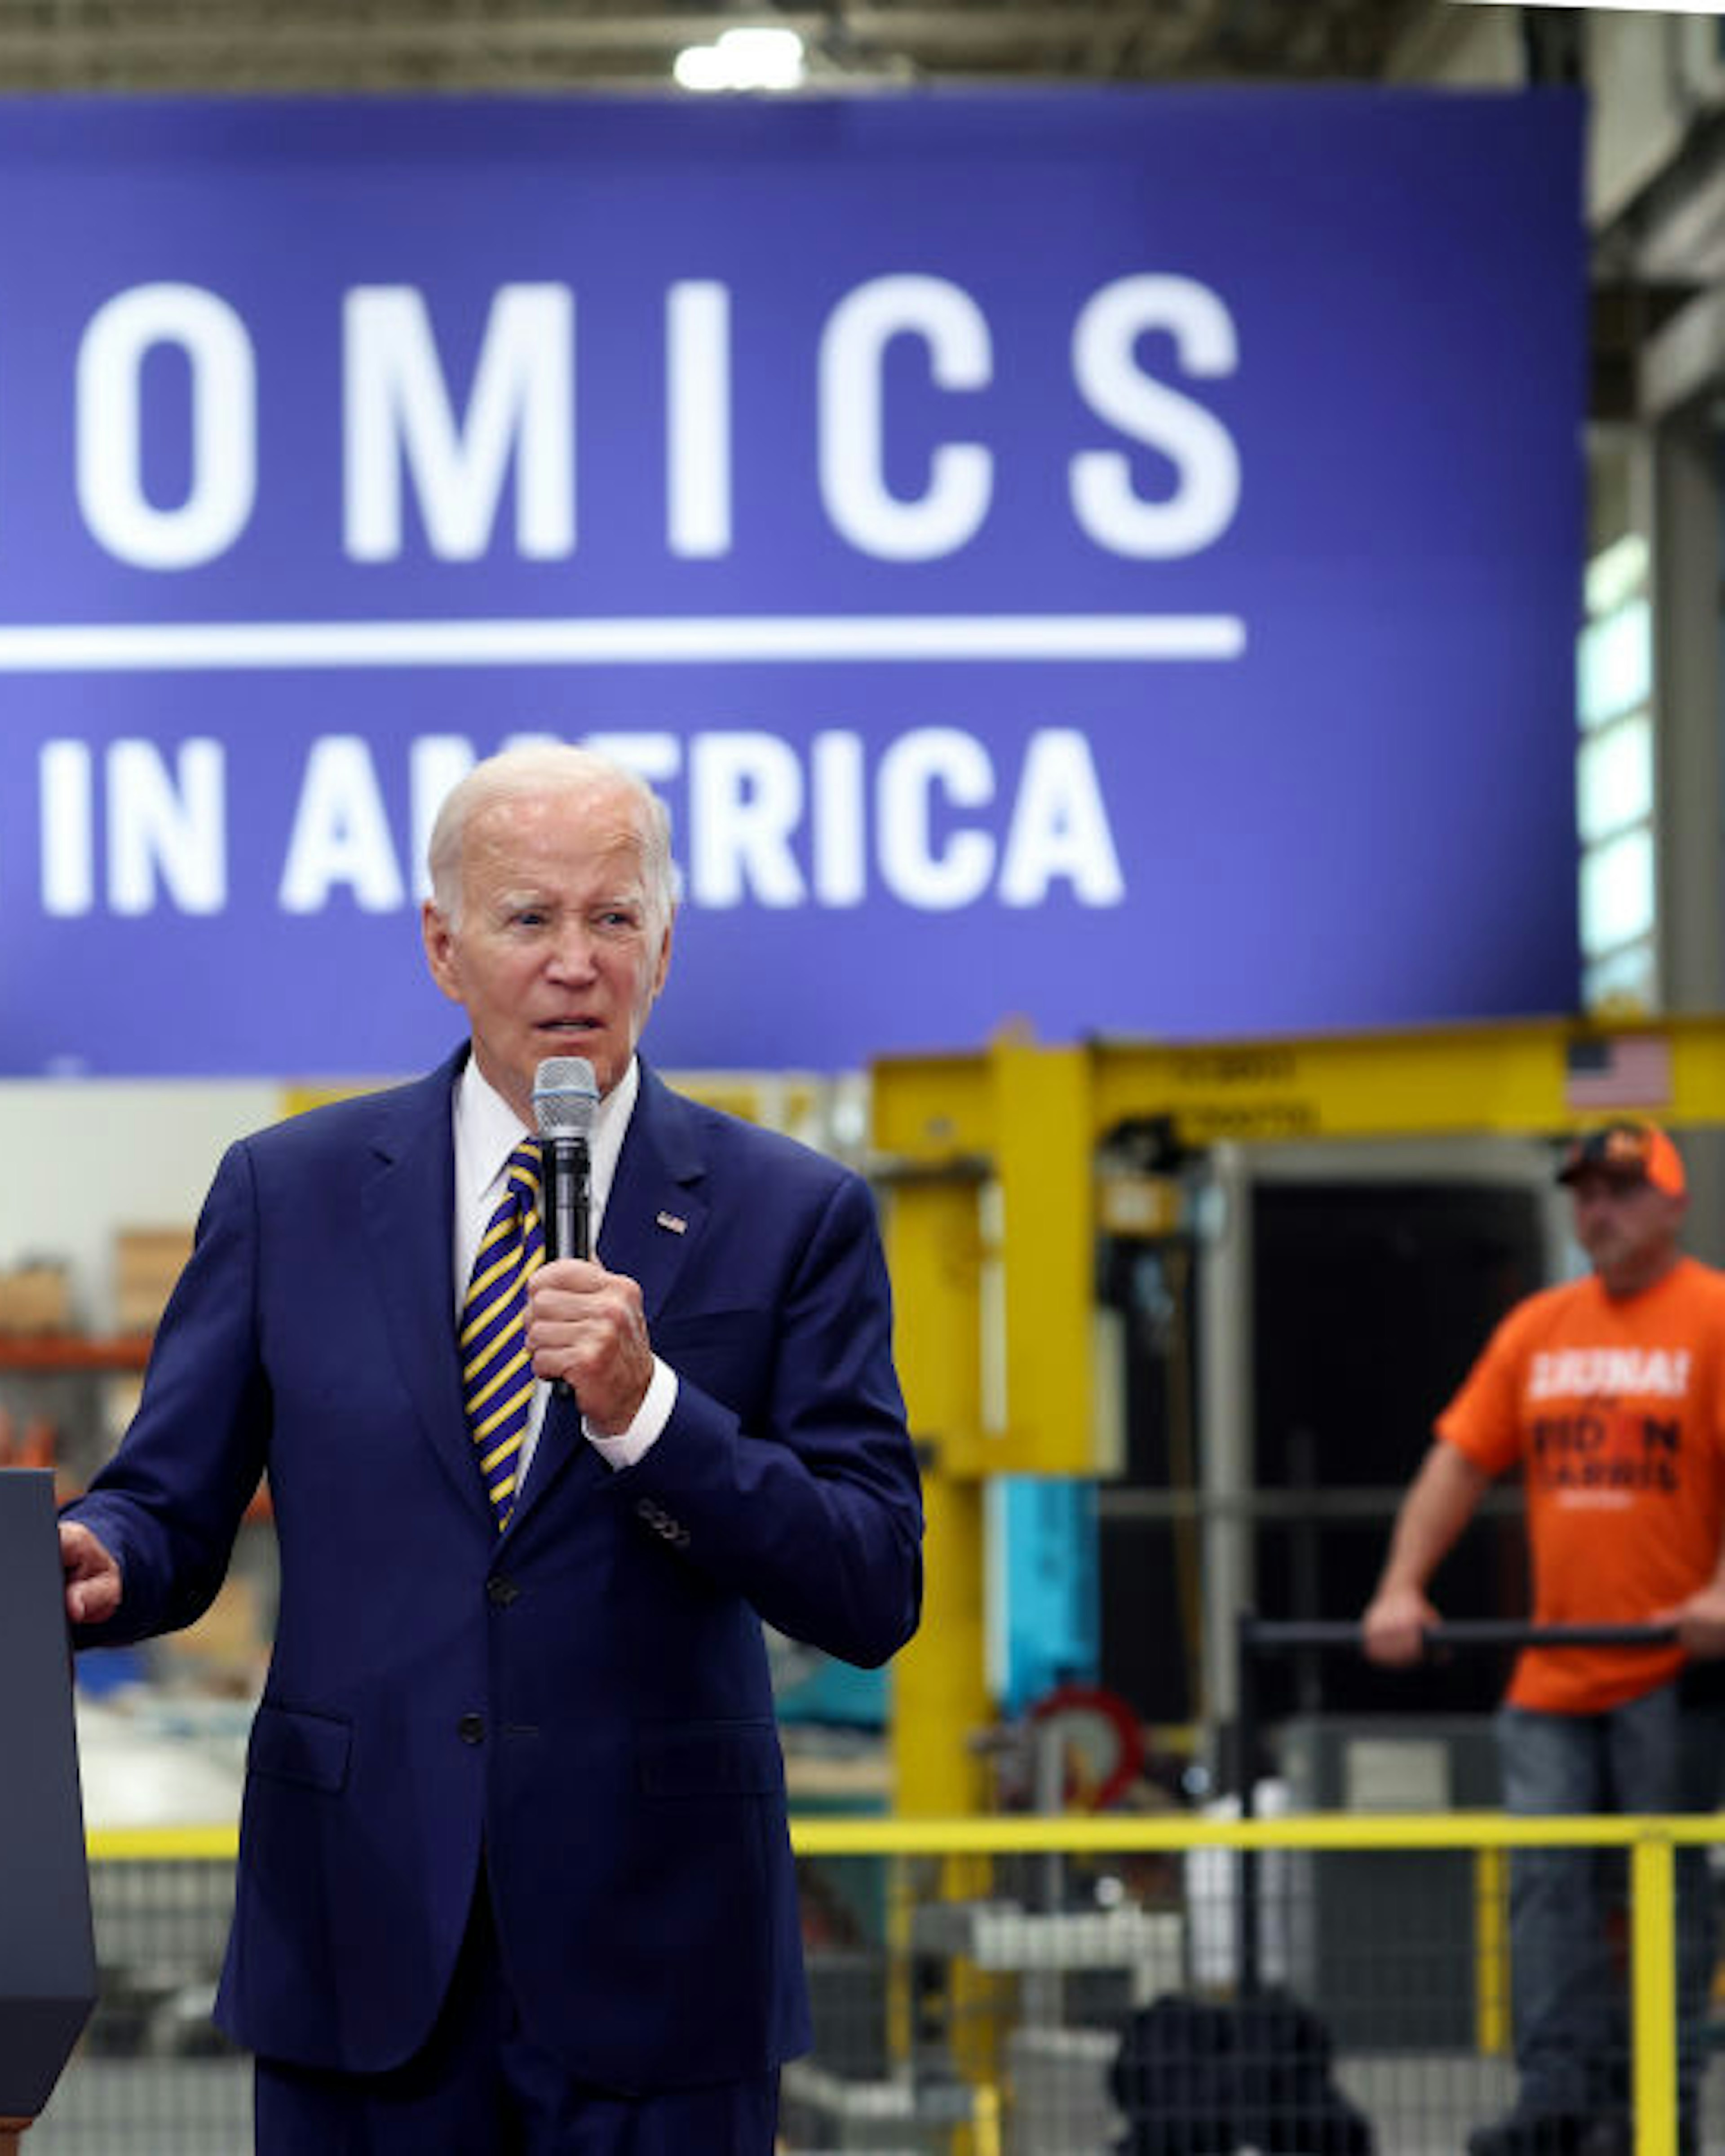 MILWAUKEE, WISCONSIN - AUGUST 15: U.S. President Joe Biden speaks to guests at Ingeteam Inc., an electrical equipment manufacturer, on August 15, 2023 in Milwaukee, Wisconsin. Biden used the opportunity to speak about his "Bidenomics" economic plan on the one-year anniversary of the Inflation Reduction Act of 2022. (Photo by Scott Olson/Getty Images)